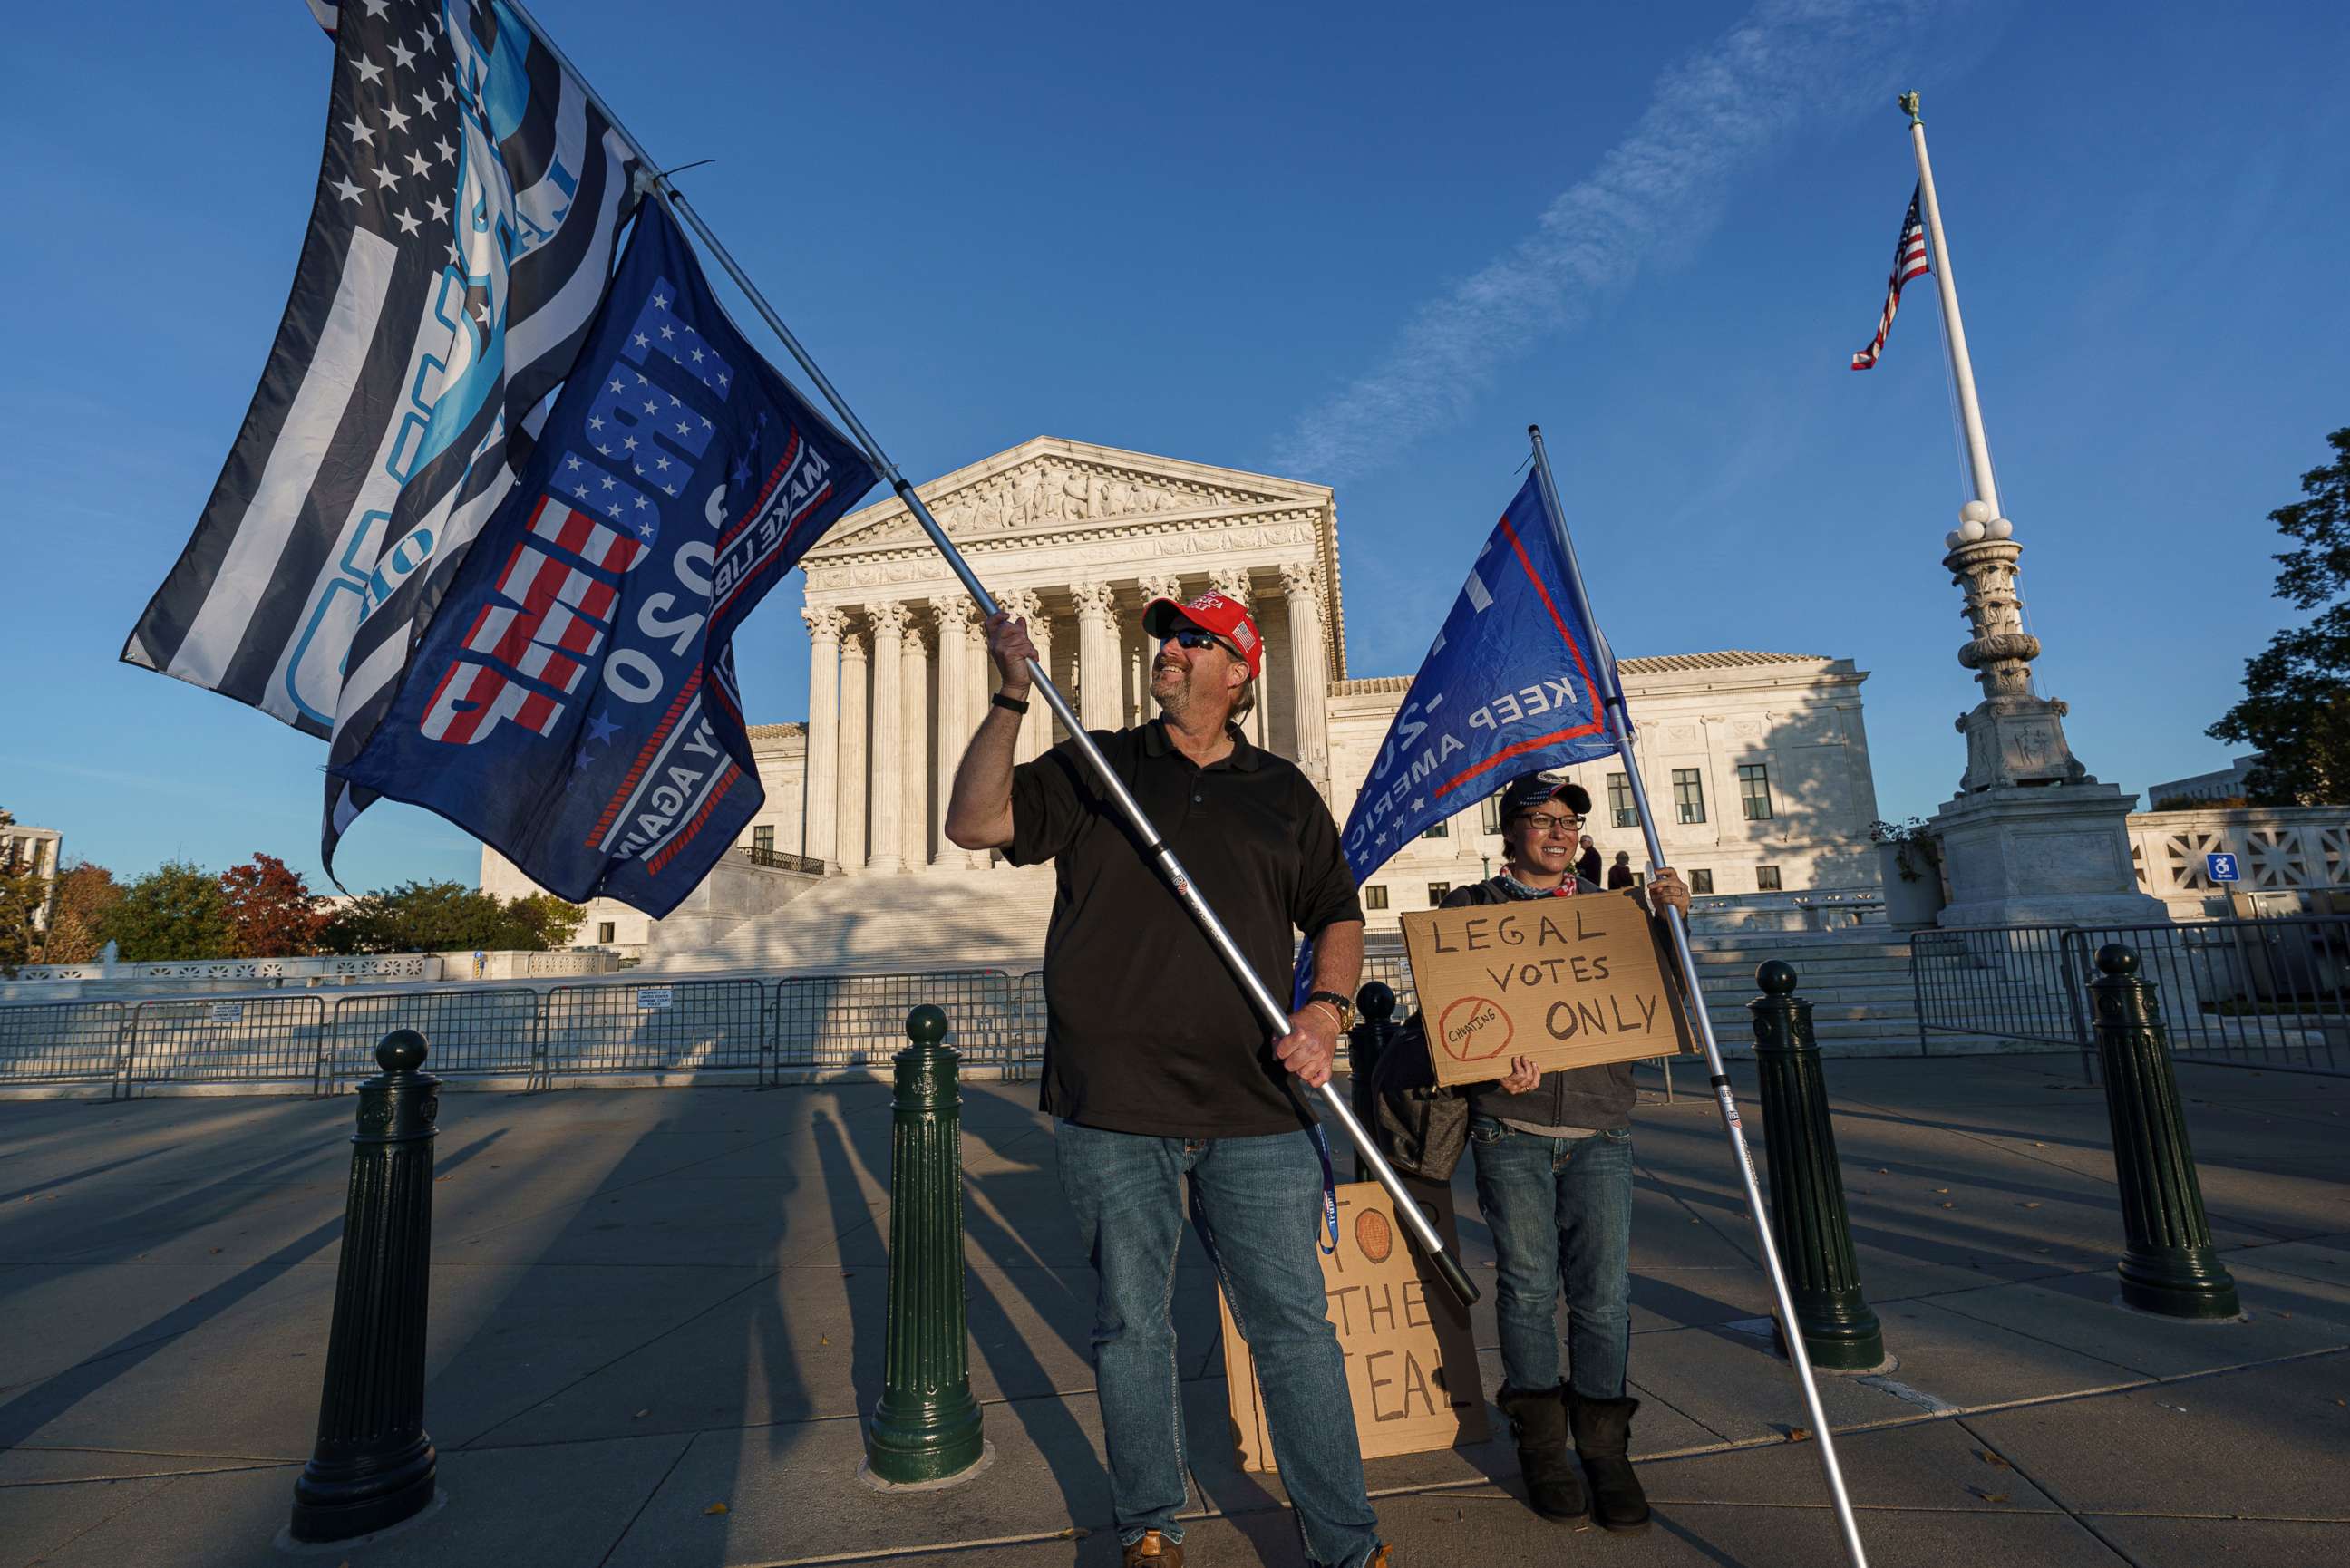 PHOTO: While waiting for a result in the election, Scott Knuth of Woodbridge, Va., and Christy Pheagin, of Washington, stand outside the Supreme Court in Washington, Nov. 6, 2020.